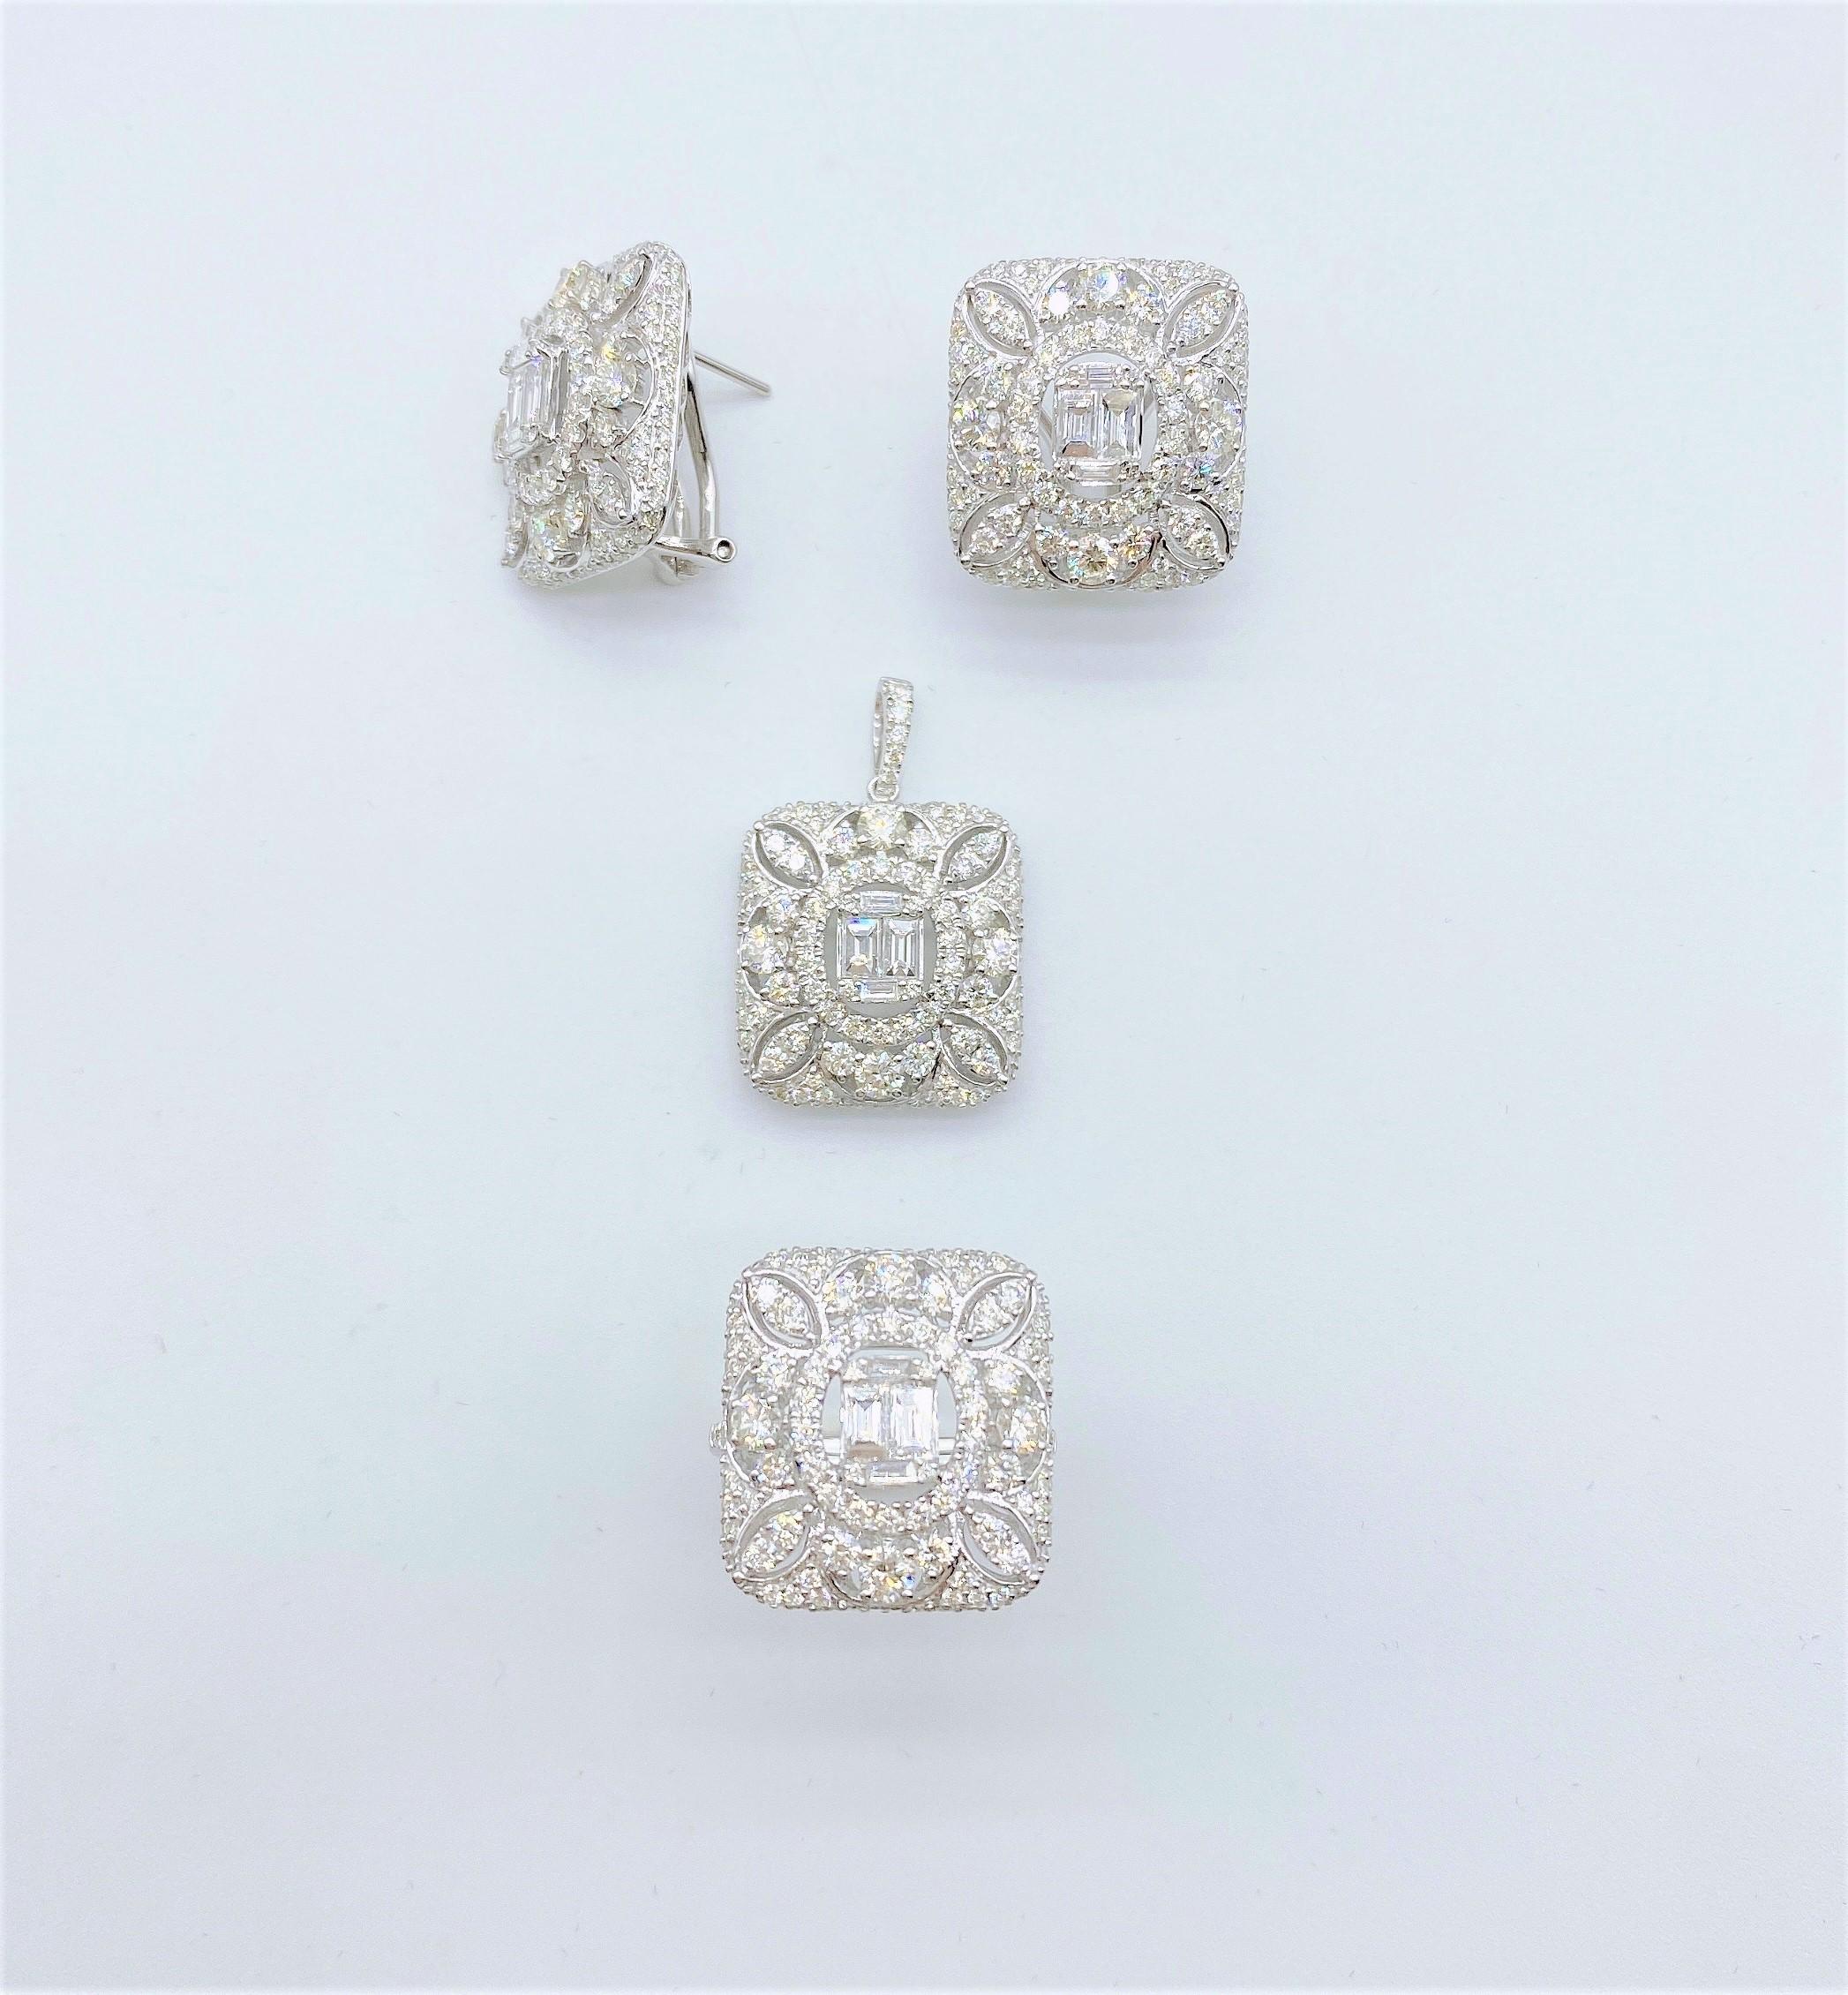 The Following Item we are offering are these Extremely Rare Beautiful 18KT Gold White Fine Exquisite Diamond Ring, Earrings and Pendant Set comprised of Rare Fine Large Exquisite Gorgeous Glittering Diamonds!!! T.C.W. Approx 8CTS!! This Gorgeous Set